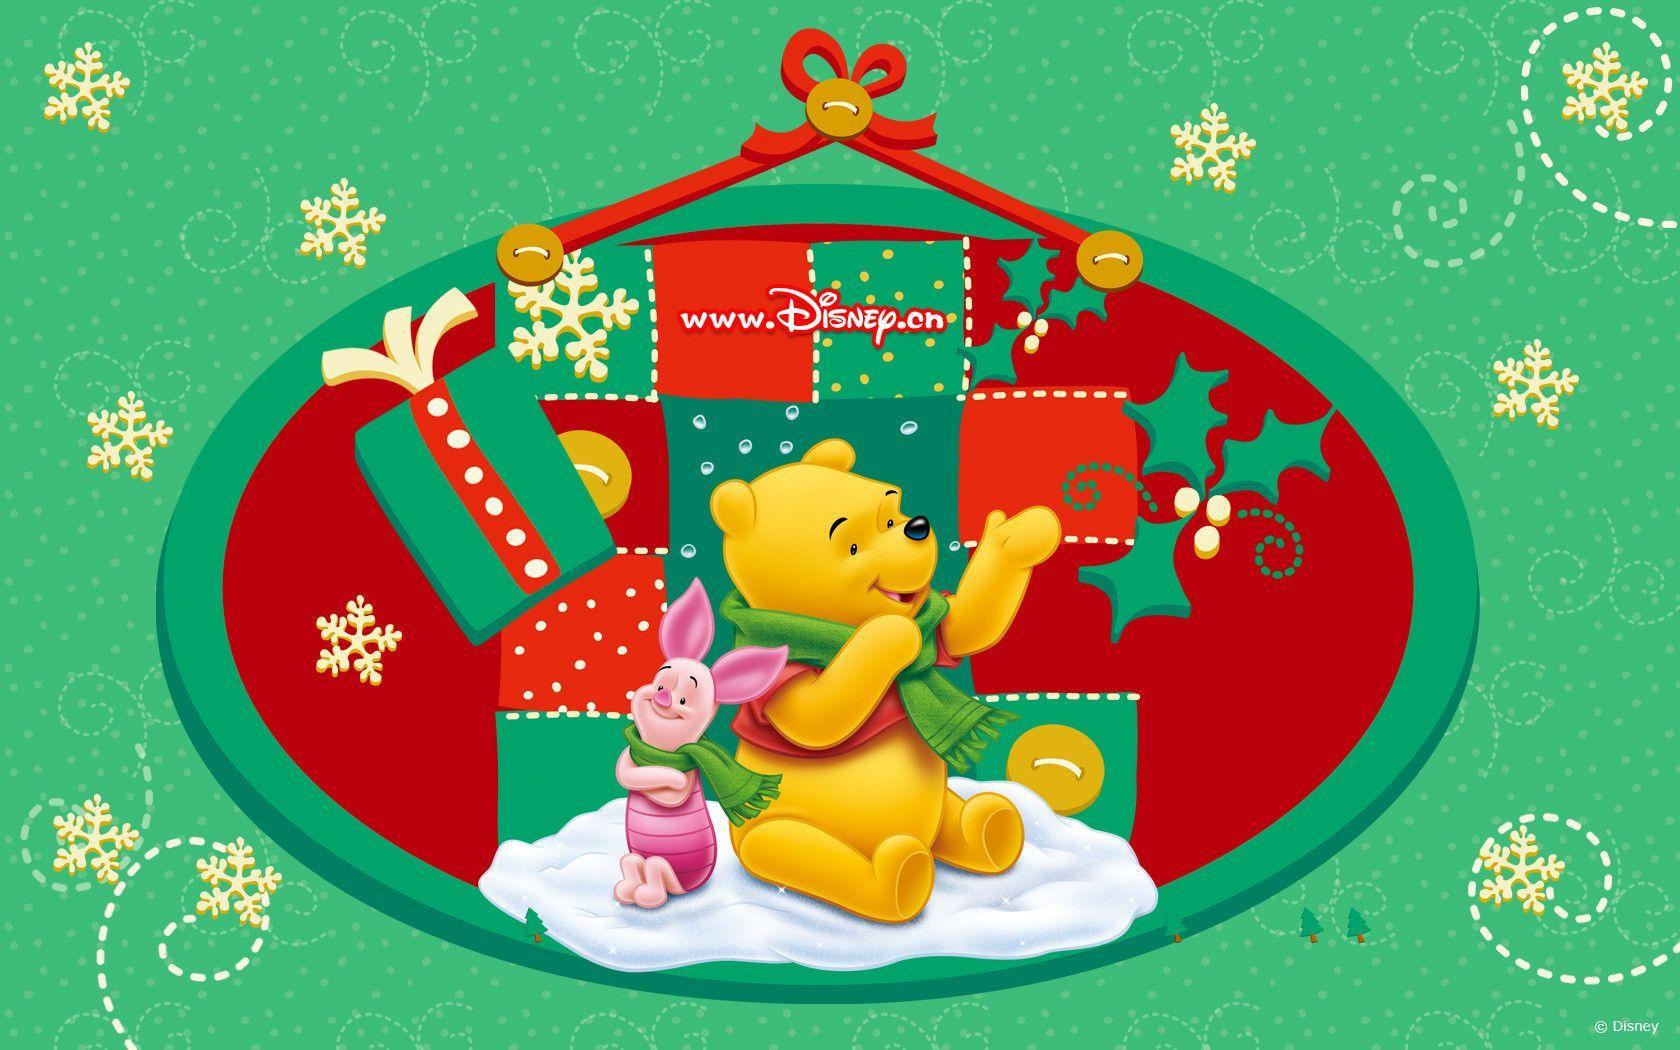 Wallpaper For > Winnie The Pooh Christmas Wallpaper